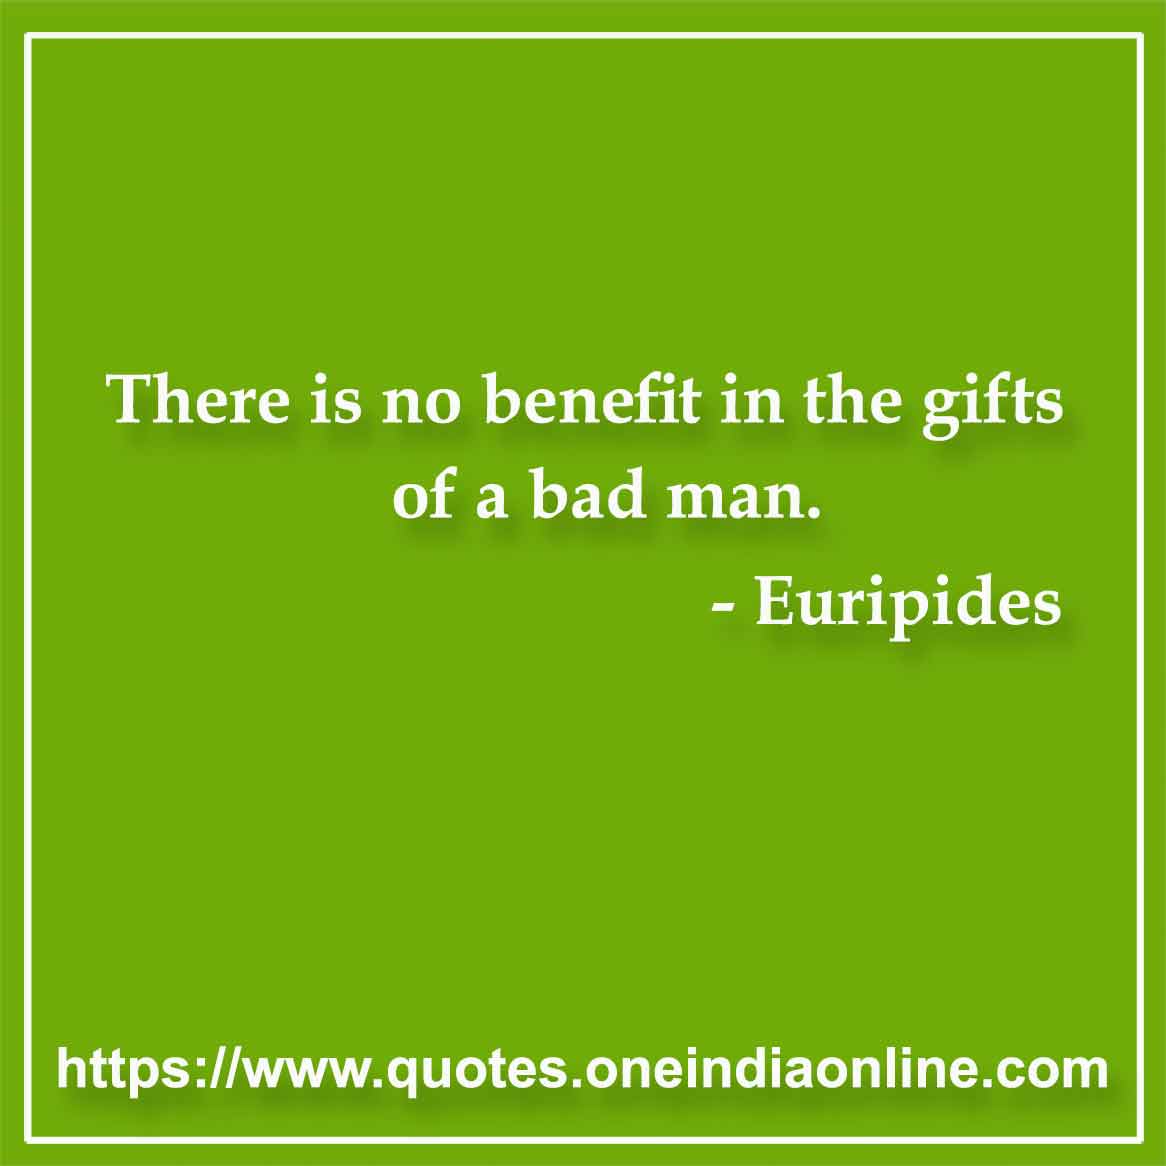 There is no benefit in the gifts of a bad man.

- Giving Quotes by Euripides